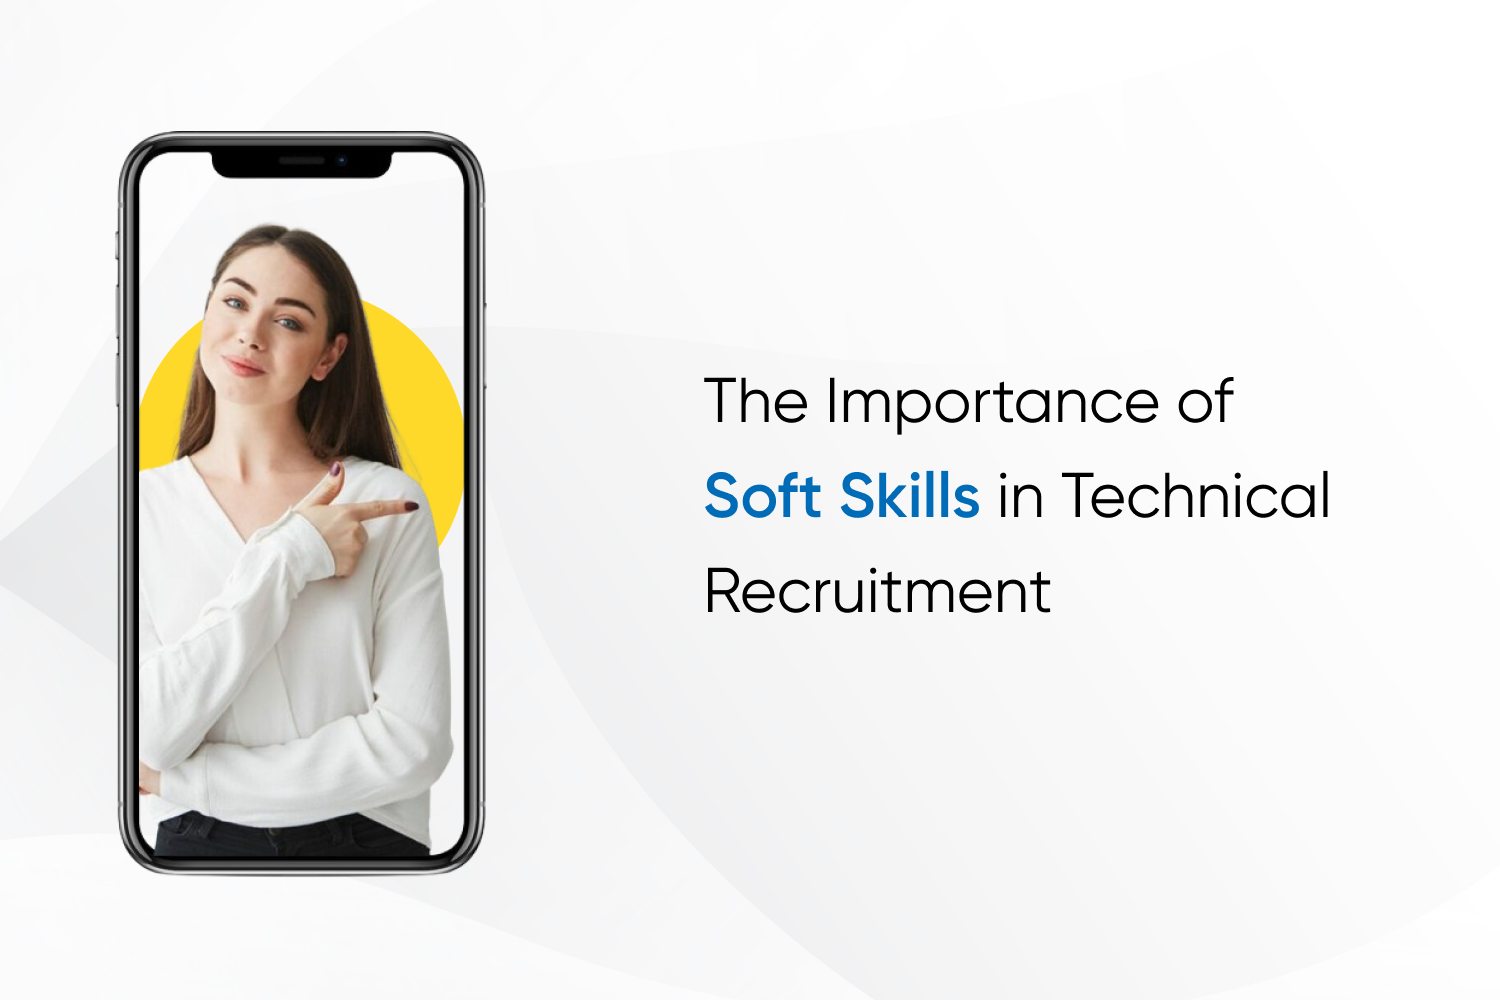 The Importance of Soft Skills in Technical Recruitment